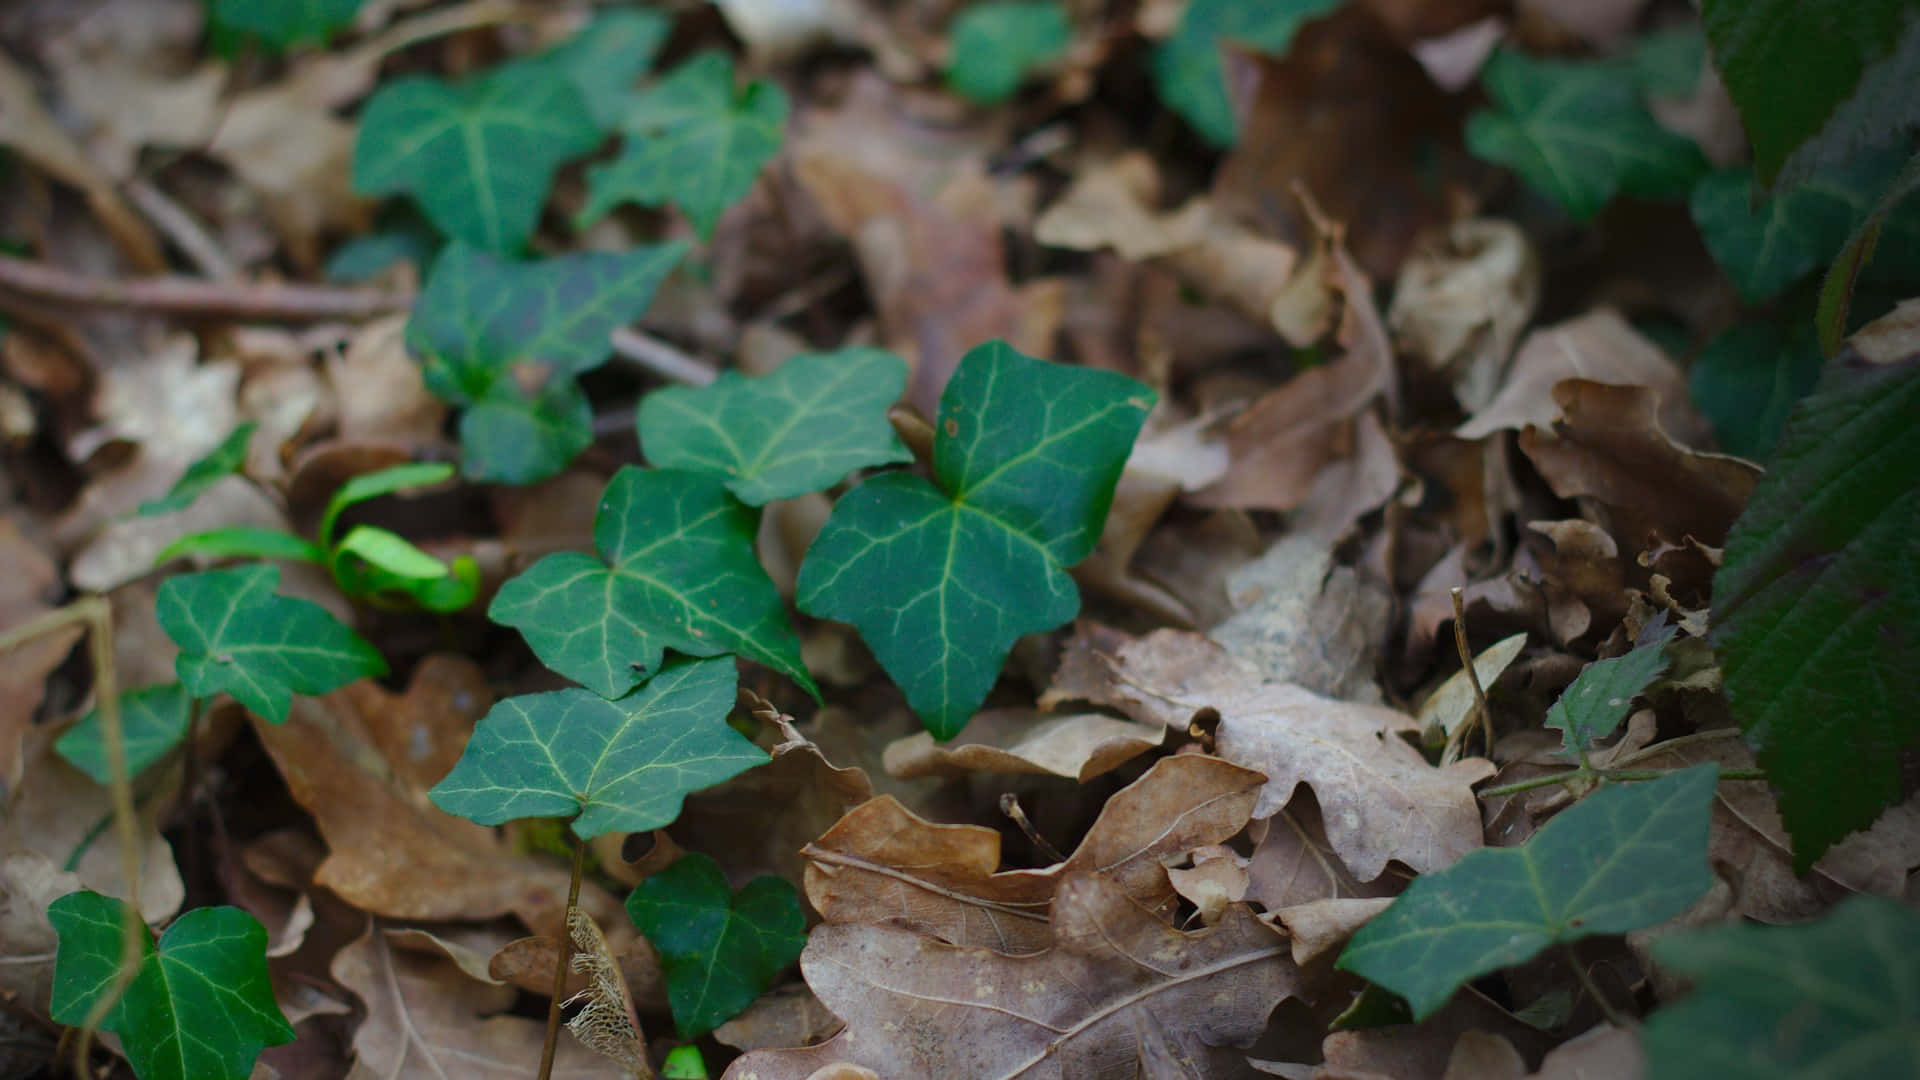 A Green Leaf On The Ground